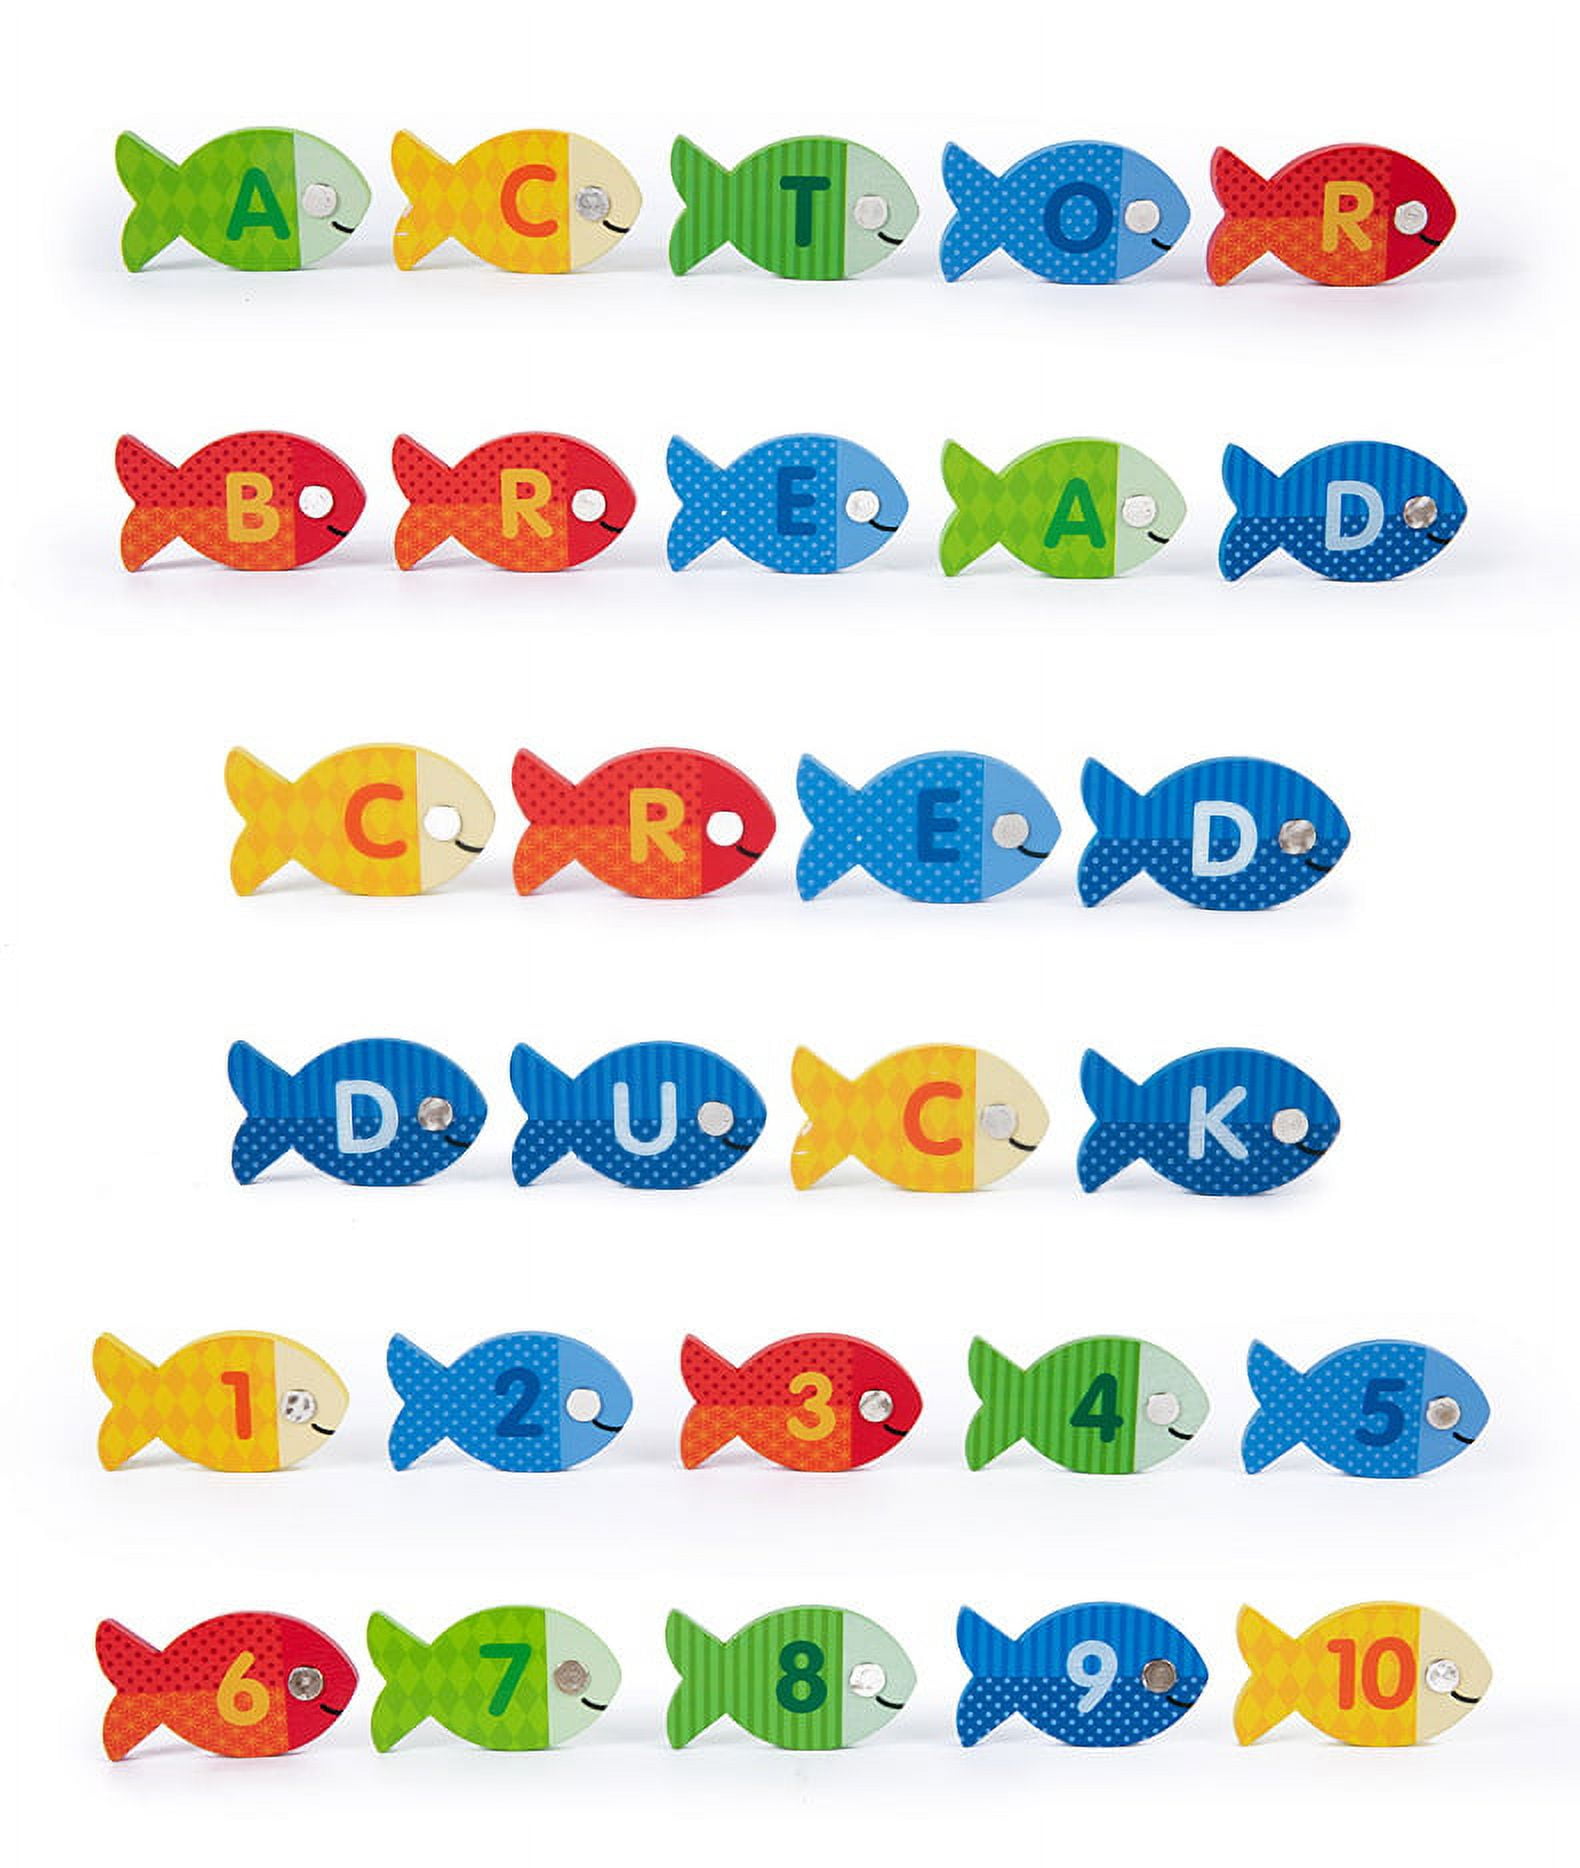 Magnetic Wooden Fishing Game Toys for Toddlers, Alphabet Fish Catch  Counting Game Puzzle with Numbers and Letters, Preschool Learning ABC and  Math